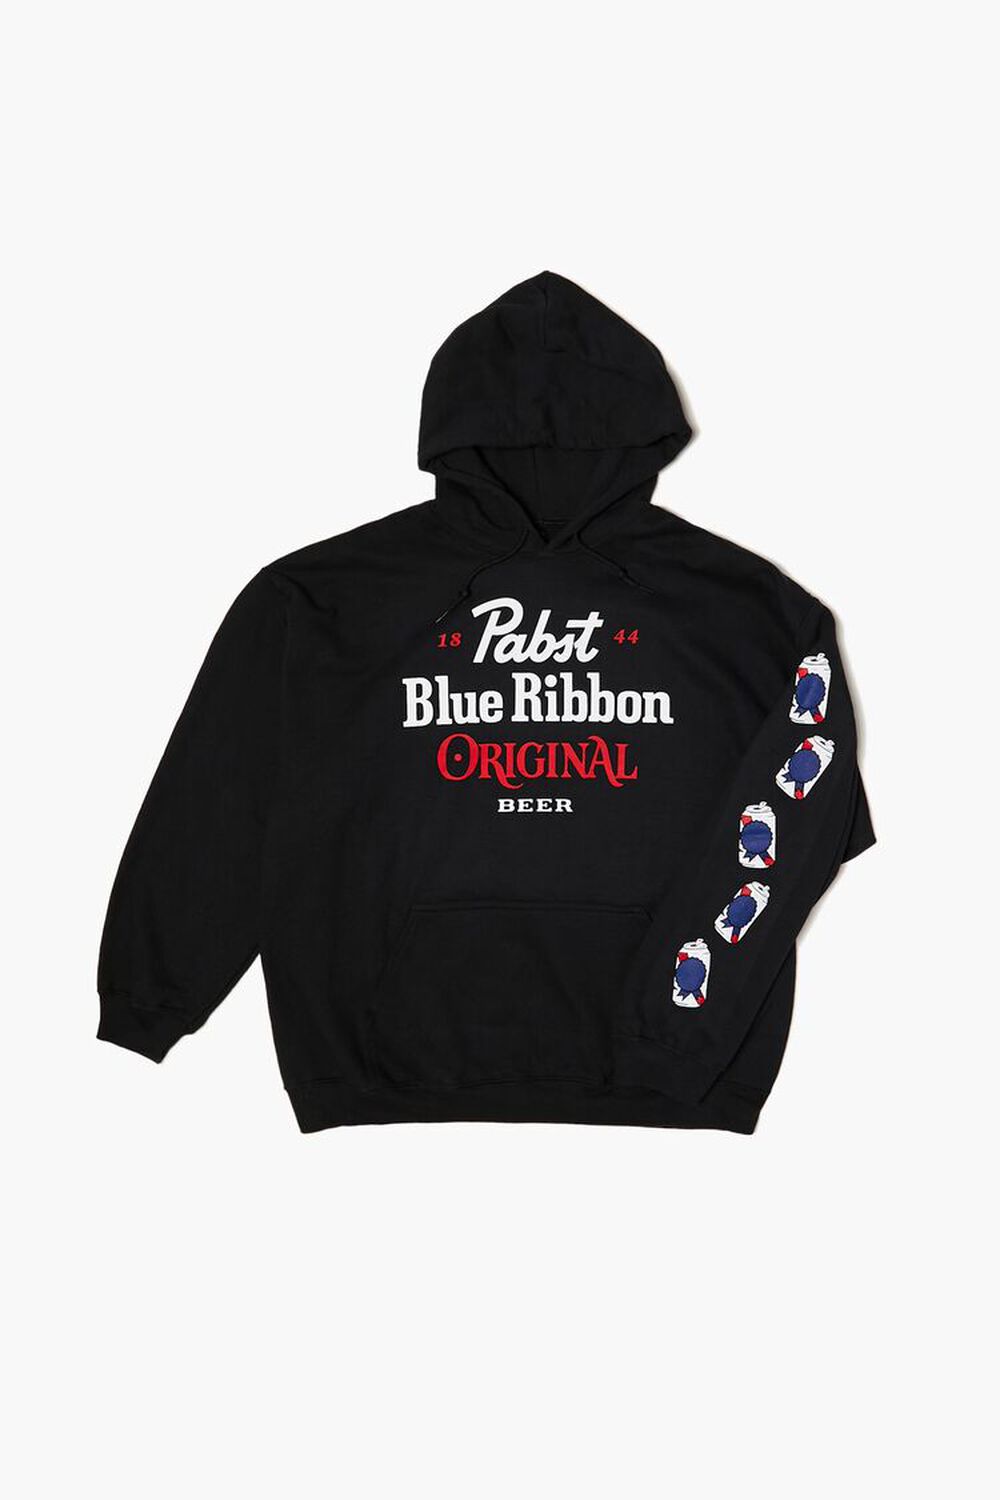 Pabst Blue Ribbon Graphic Hoodie